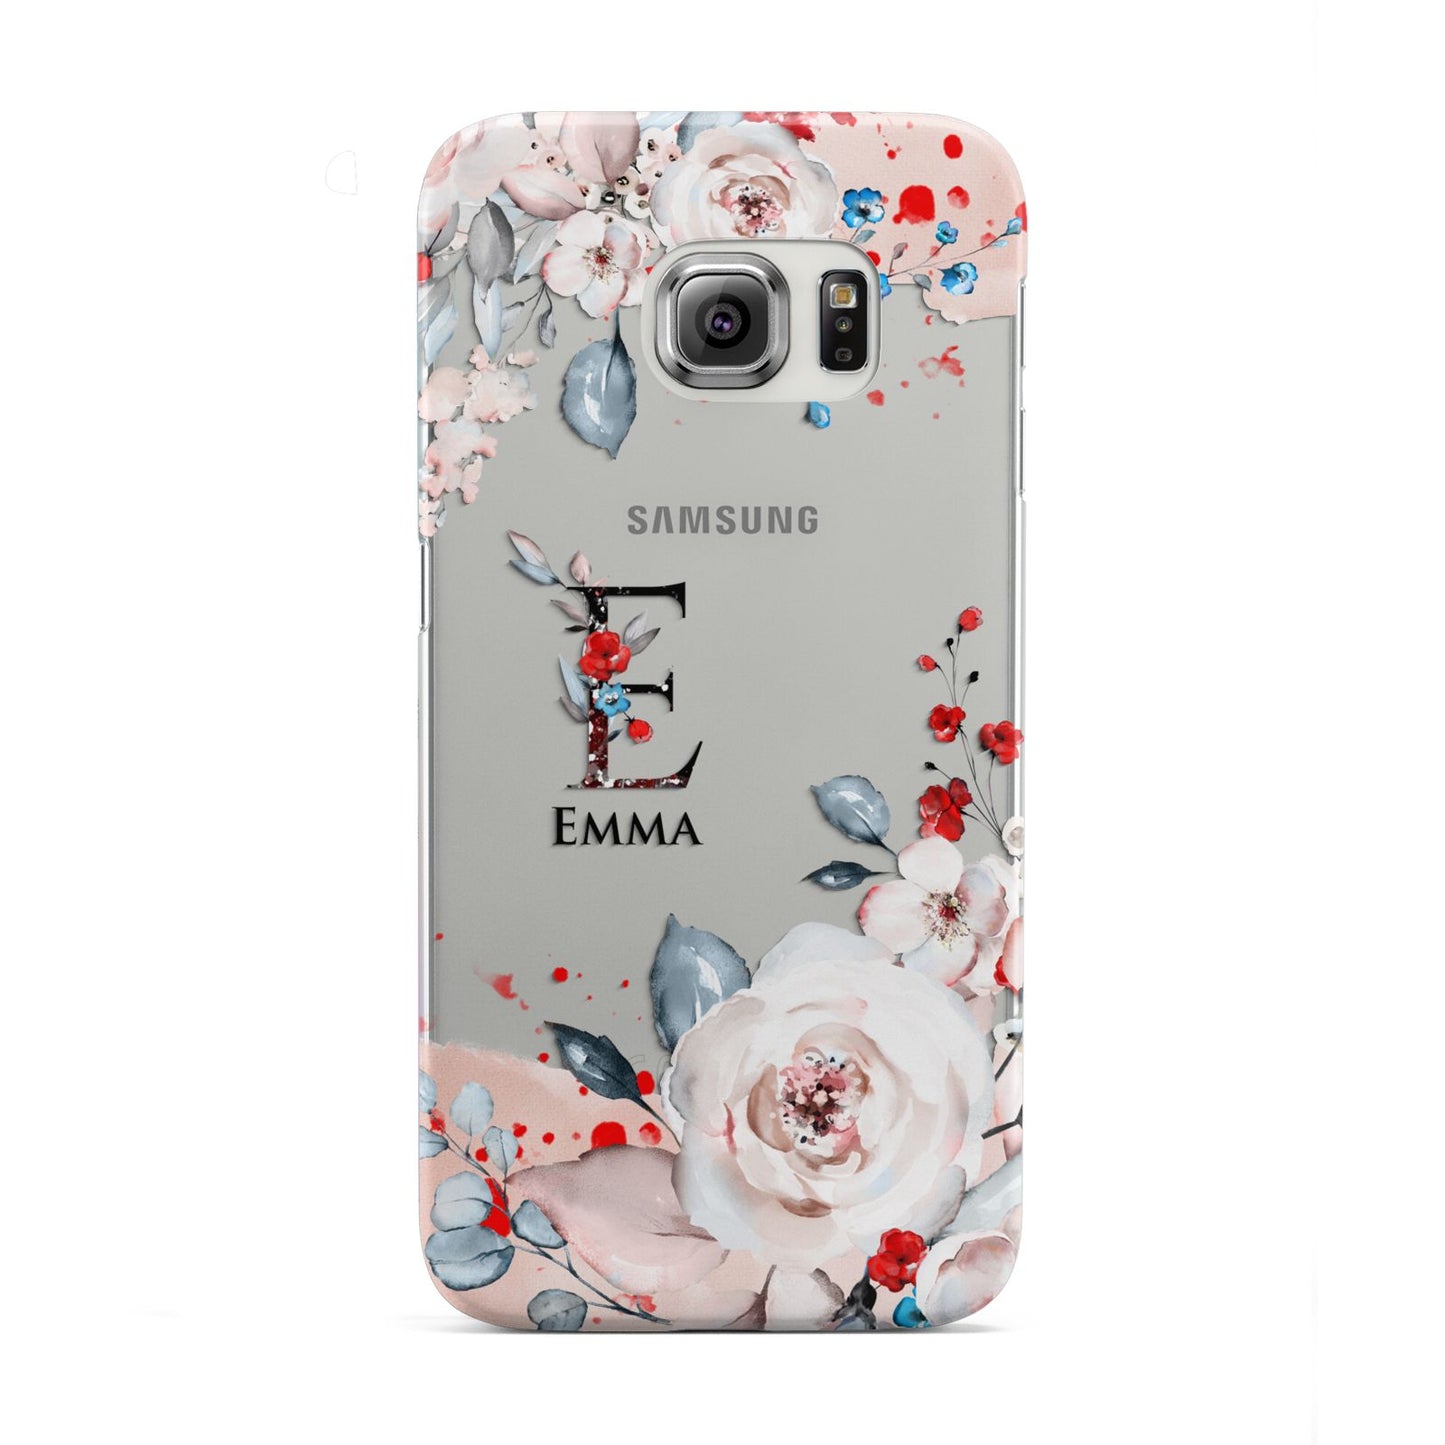 Monogrammed Roses Floral Wreath Samsung Galaxy S6 Edge Case